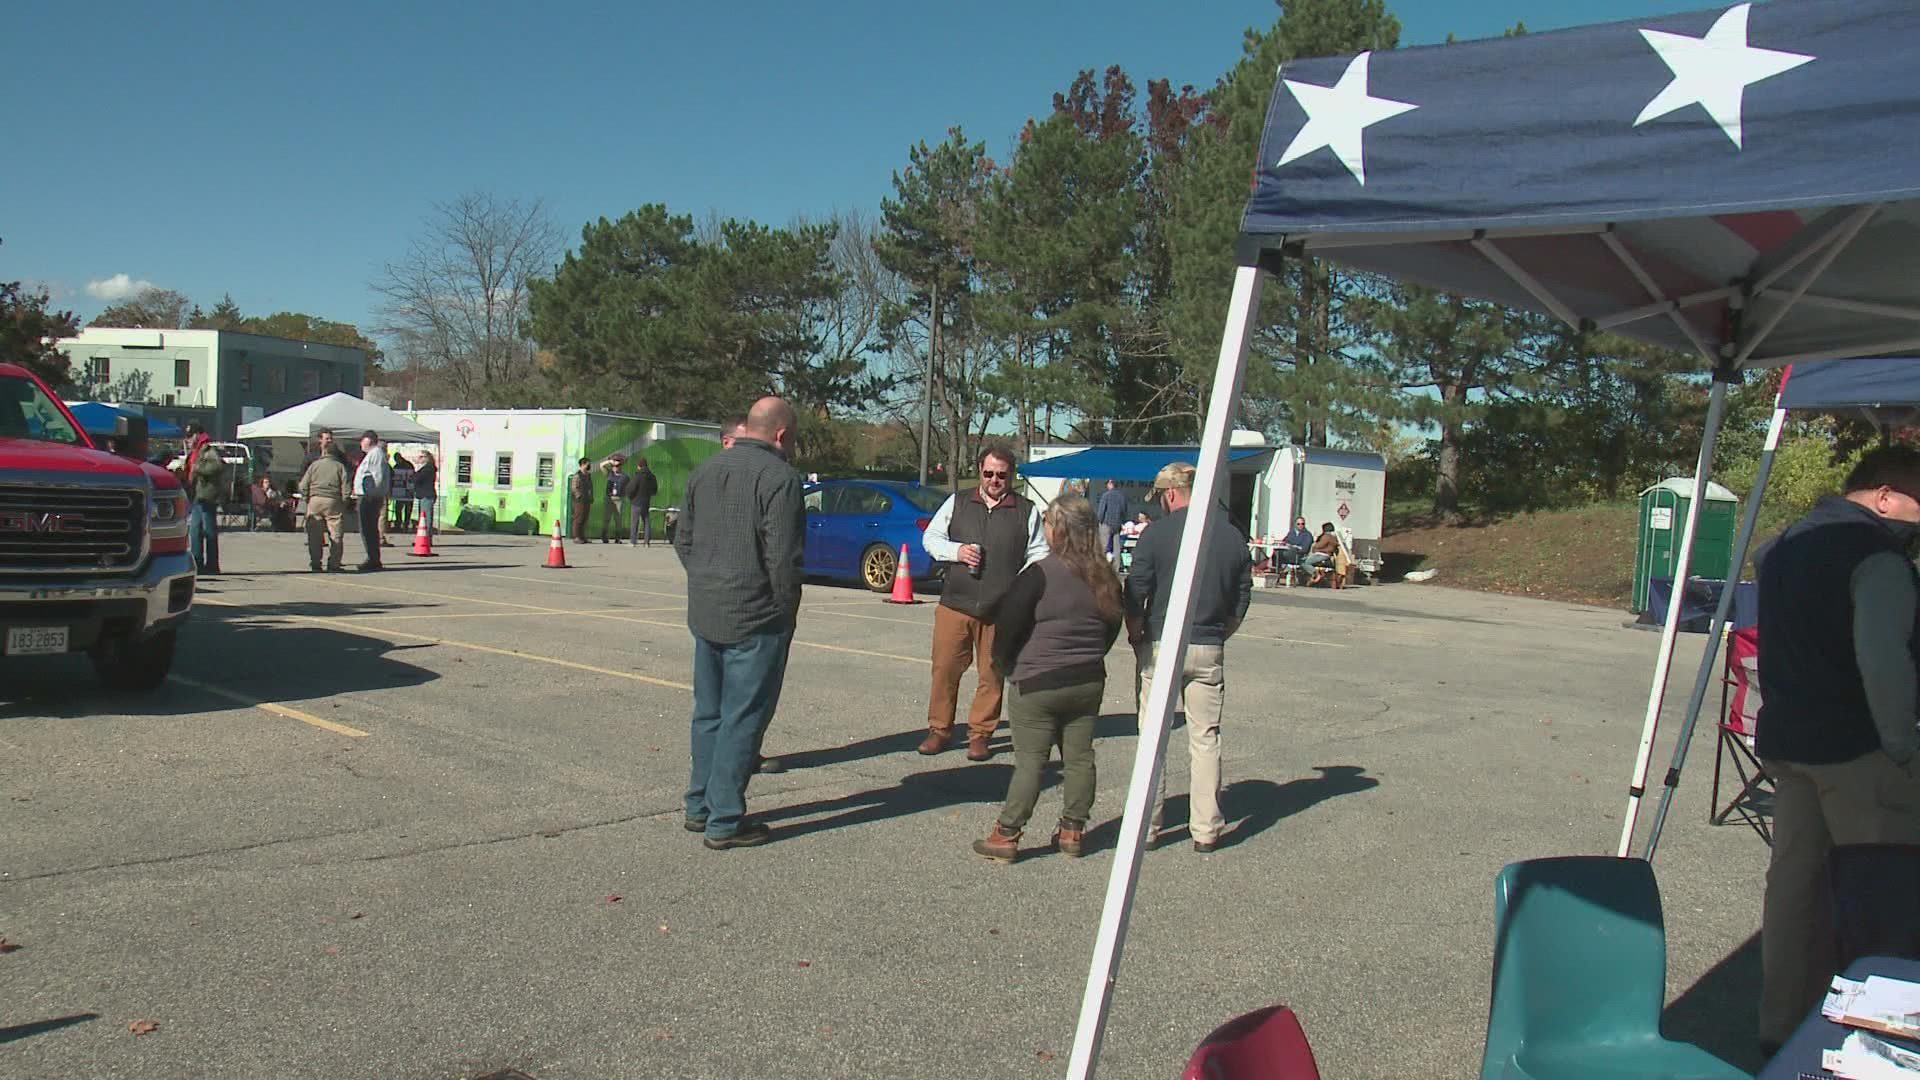 The Portland Homeless Veterans' Mobile Stand Down event allowed dozens of struggling veterans to learn more about resources to give them stability.